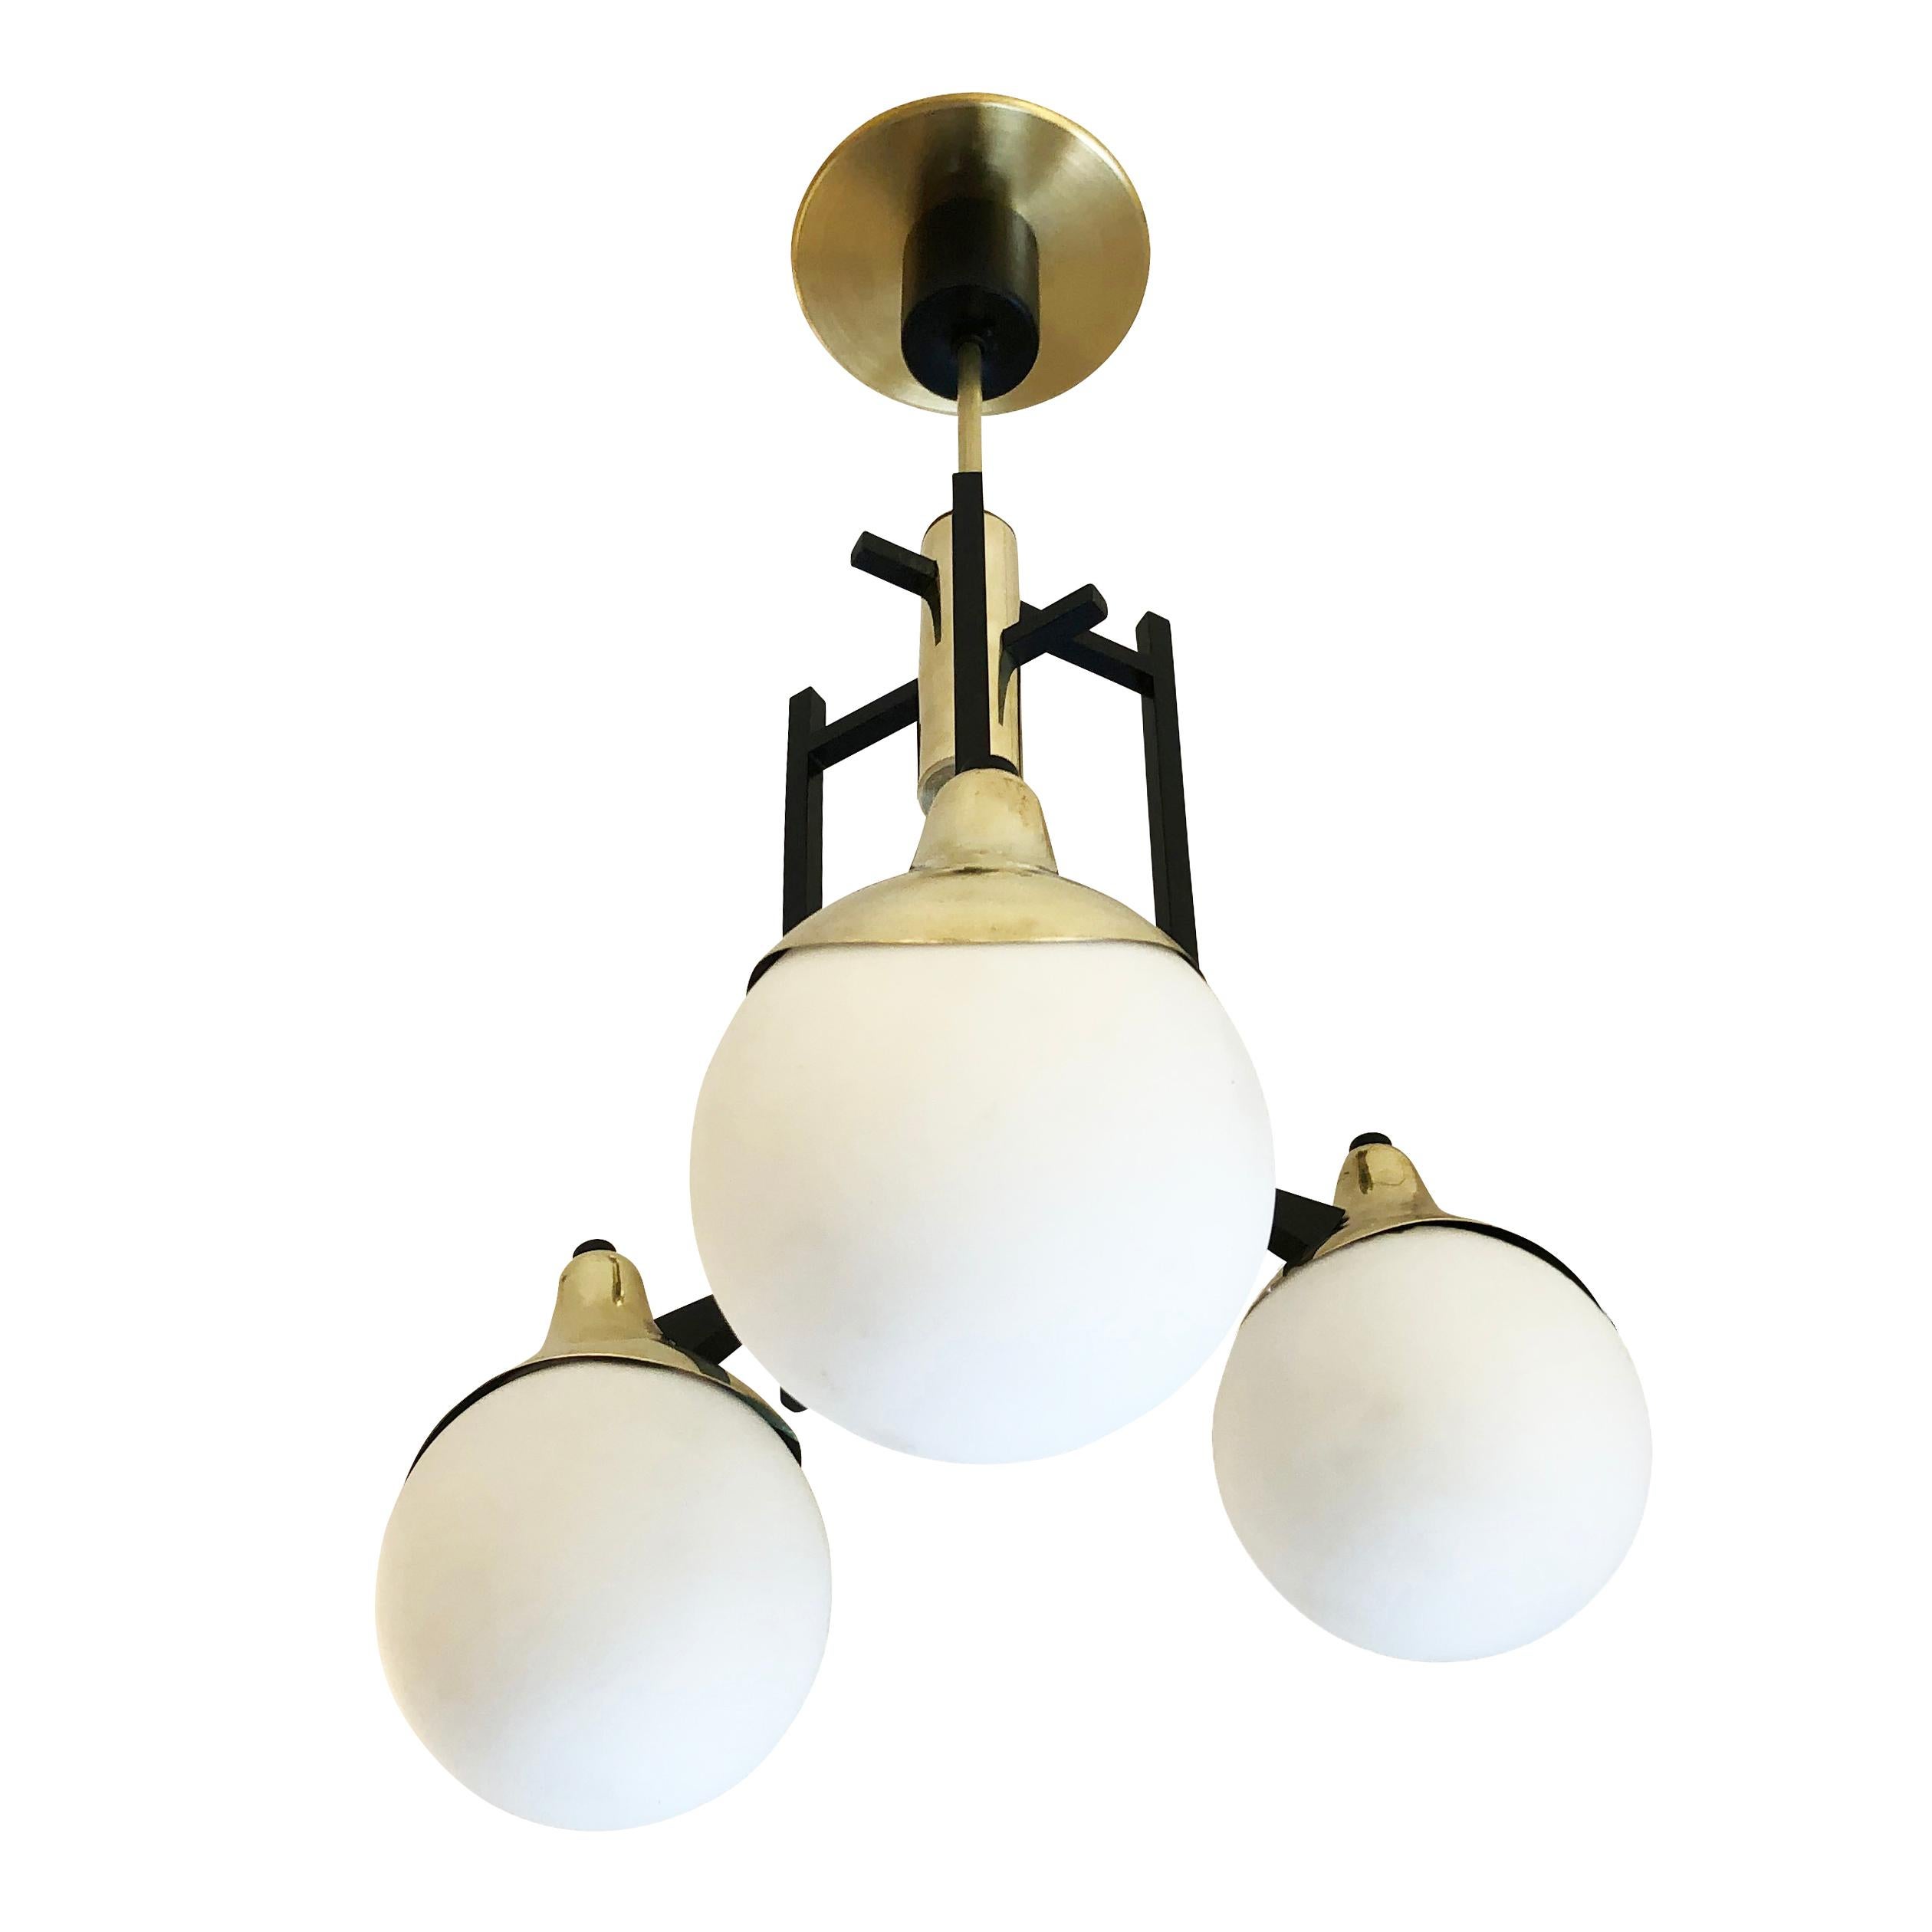 Stilnovo Style pendant with three staggered frosted glass shades mounted on brass cups. Hold three candelabra sockets.

Condition: Excellent vintage condition, minor wear consistent with age and use

Measures: Diameter 14”

Height 27” (Height can be